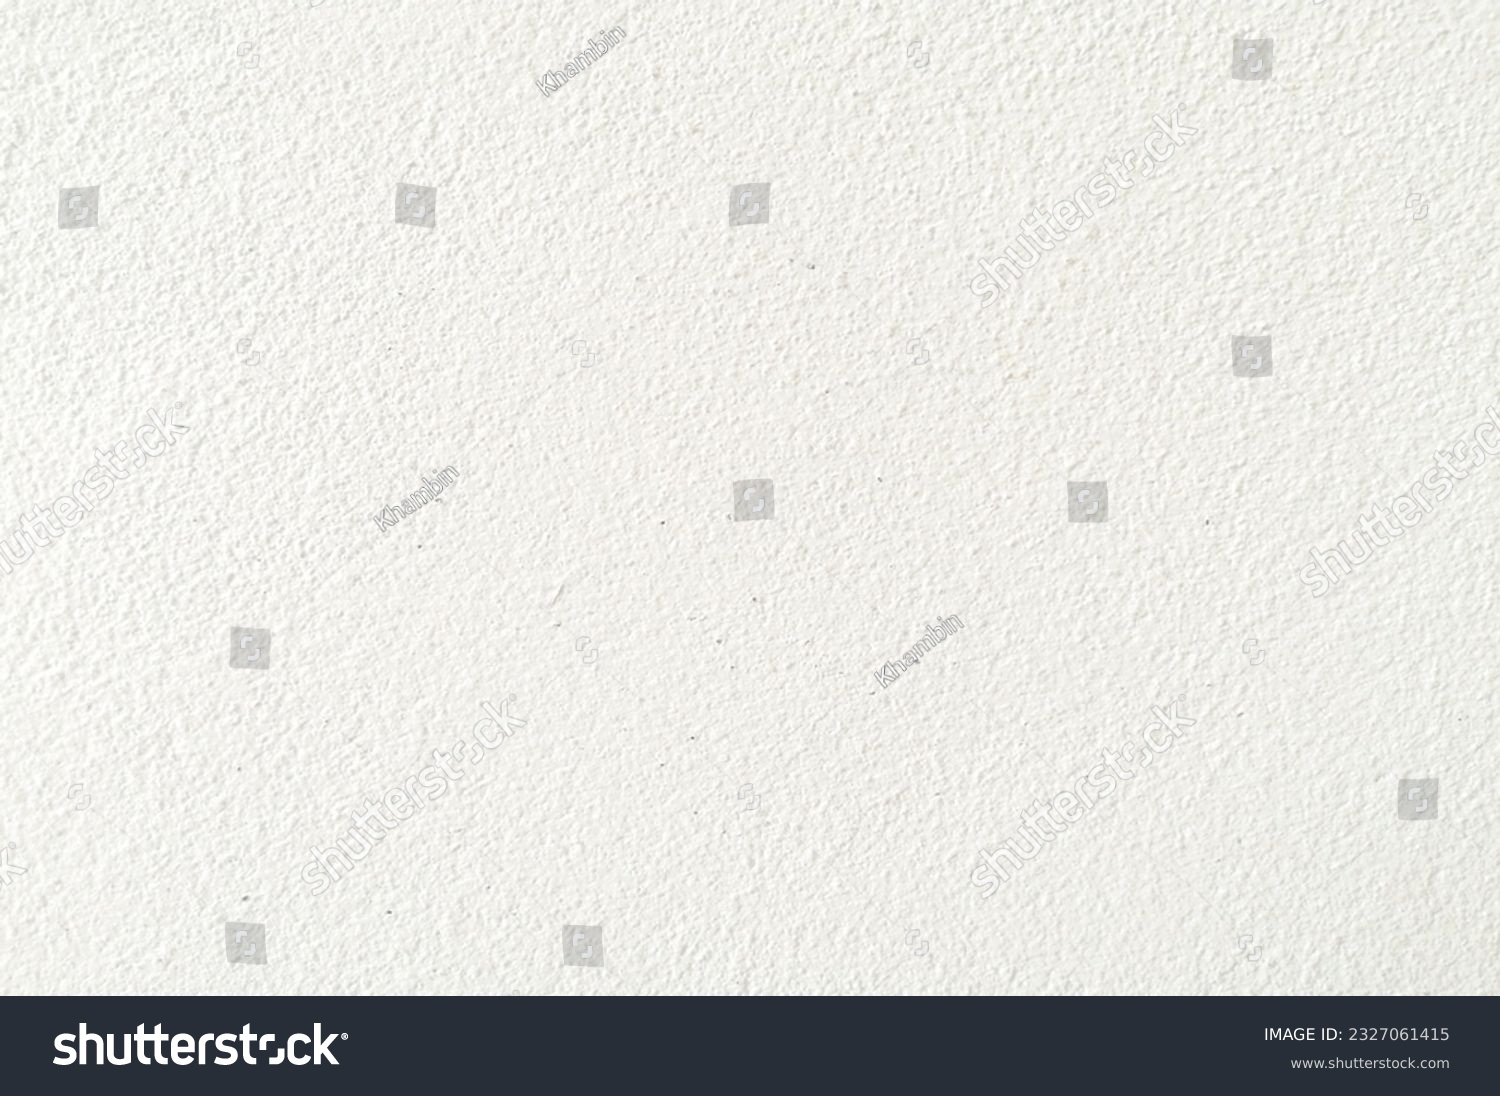 white cement; texture stone concrete,rock plastered stucco wall; painted flat fade pastel background grey solid floor grain.Rough top beige empty brushed print sand brick sepia grunge crack home dirty #2327061415